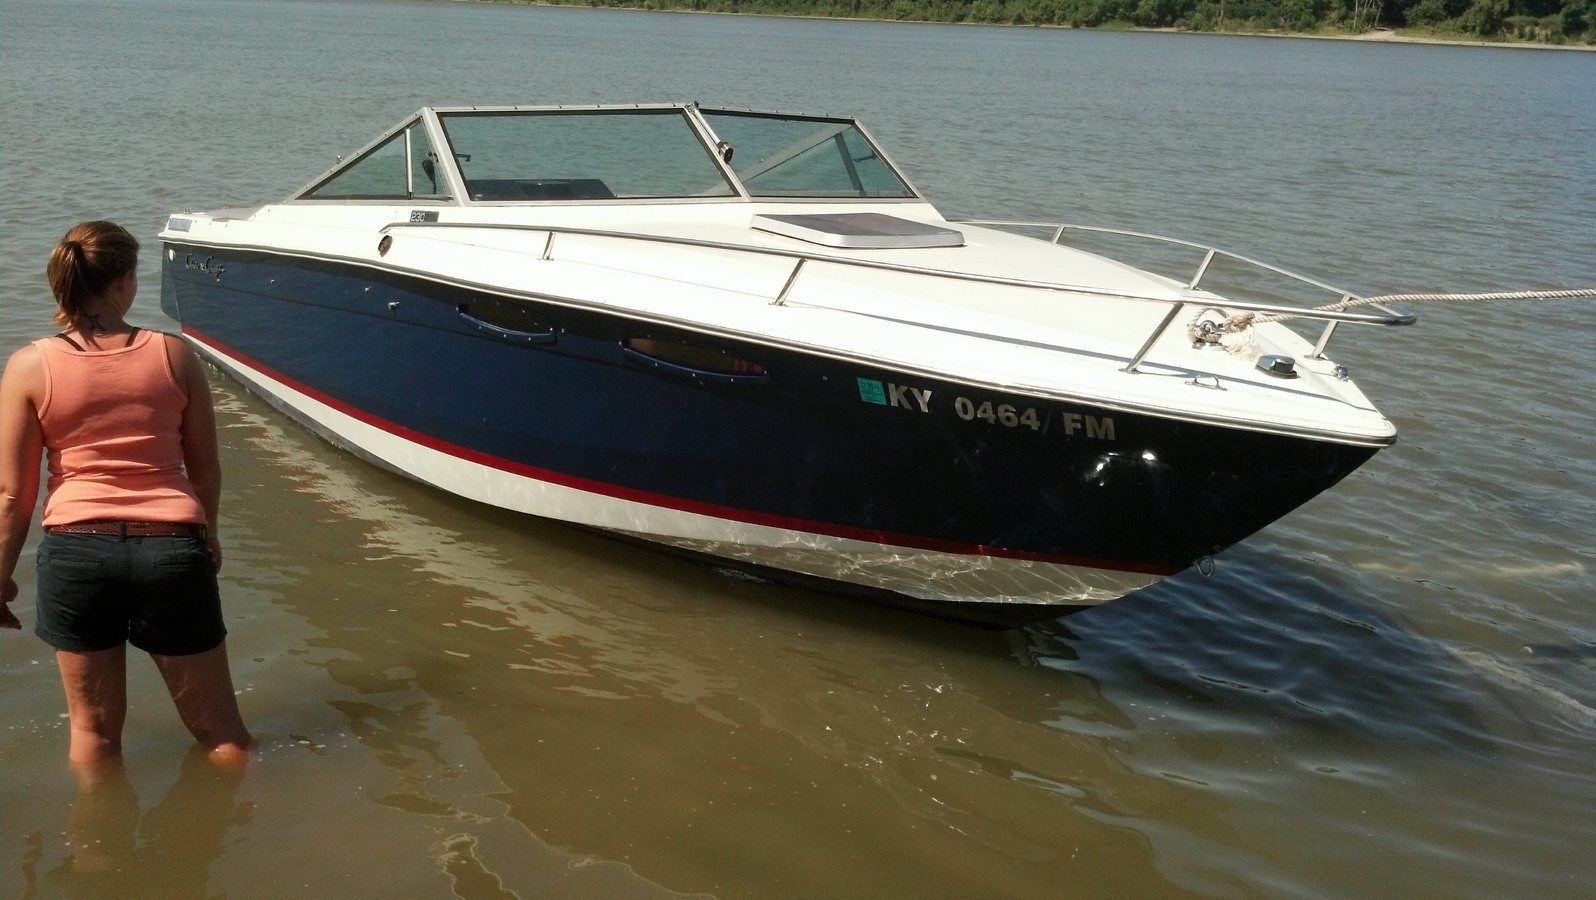 Chris Craft Scorpion 230 1984 for sale for $500 - Boats ...